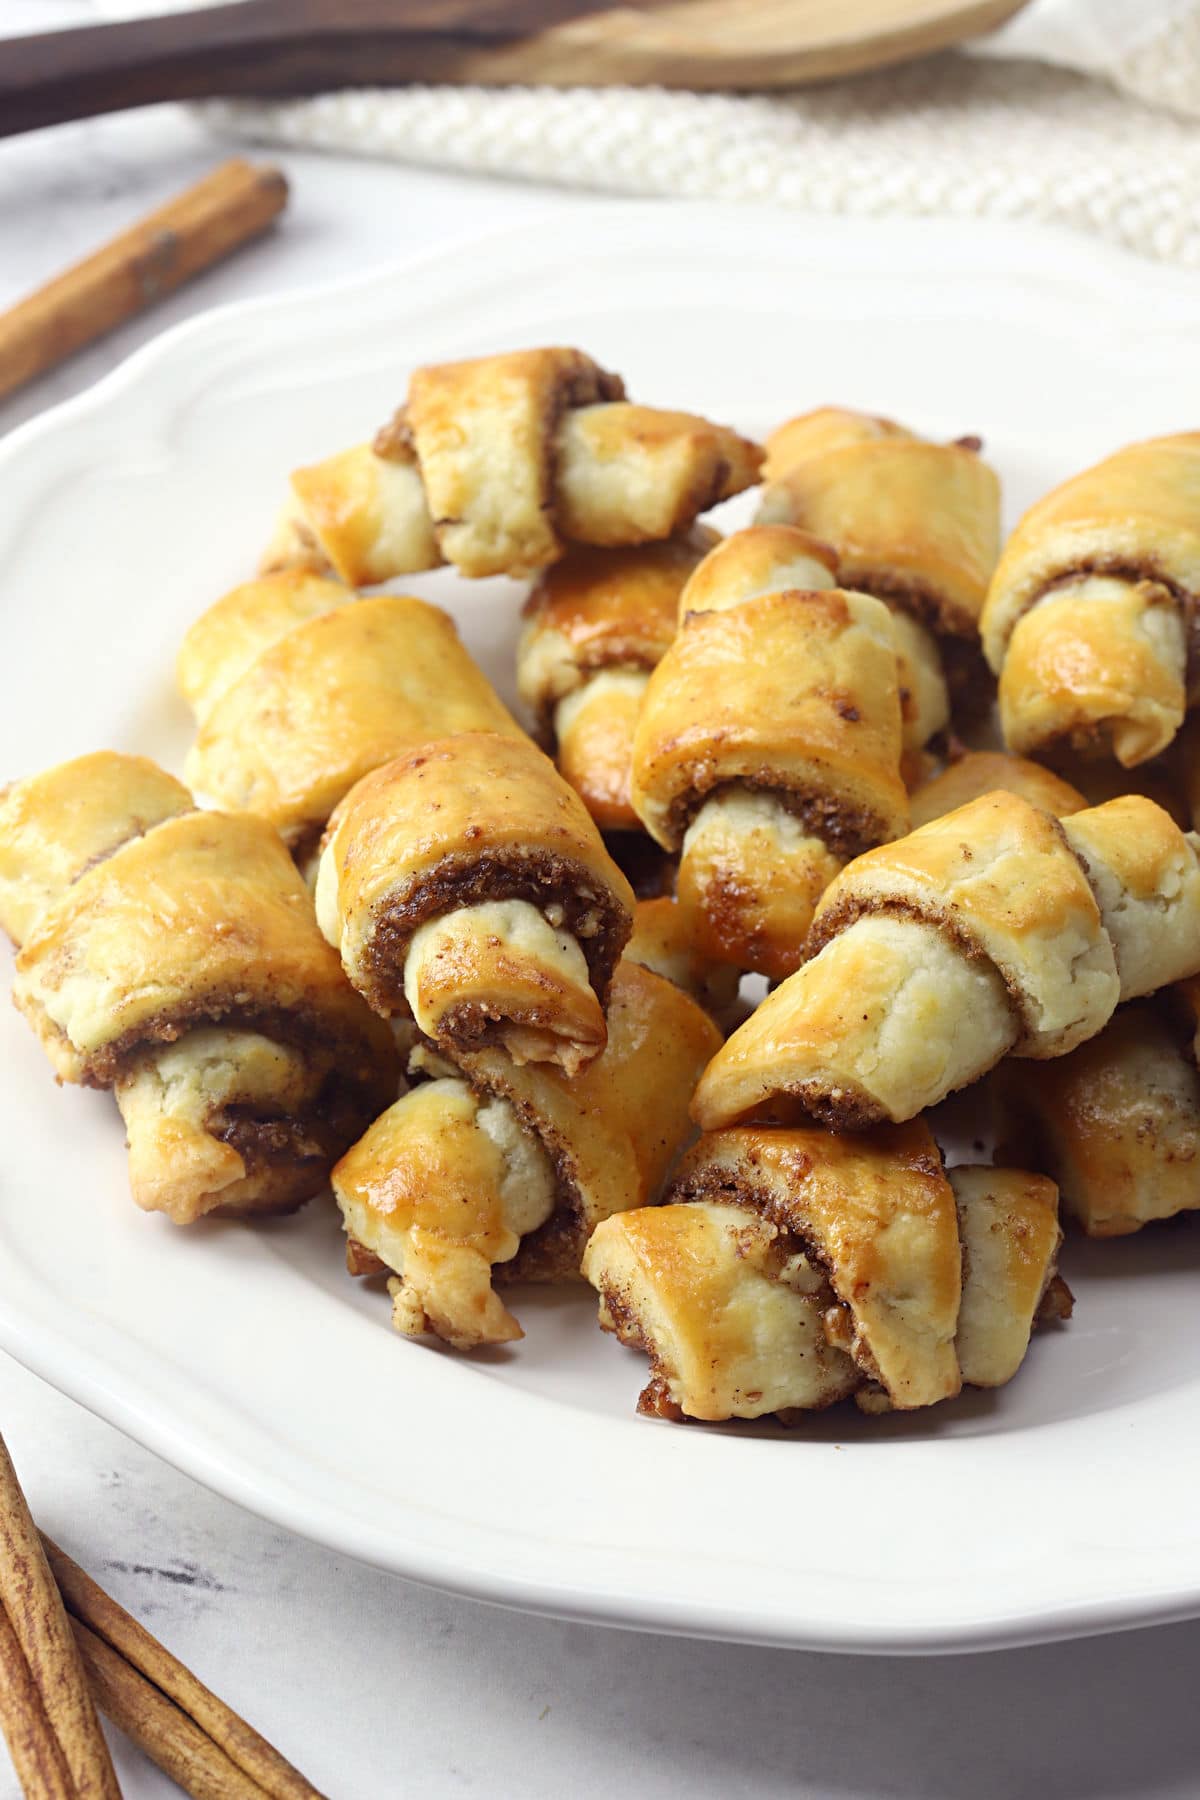 Cinnamon pecan rugelach on a white plate.